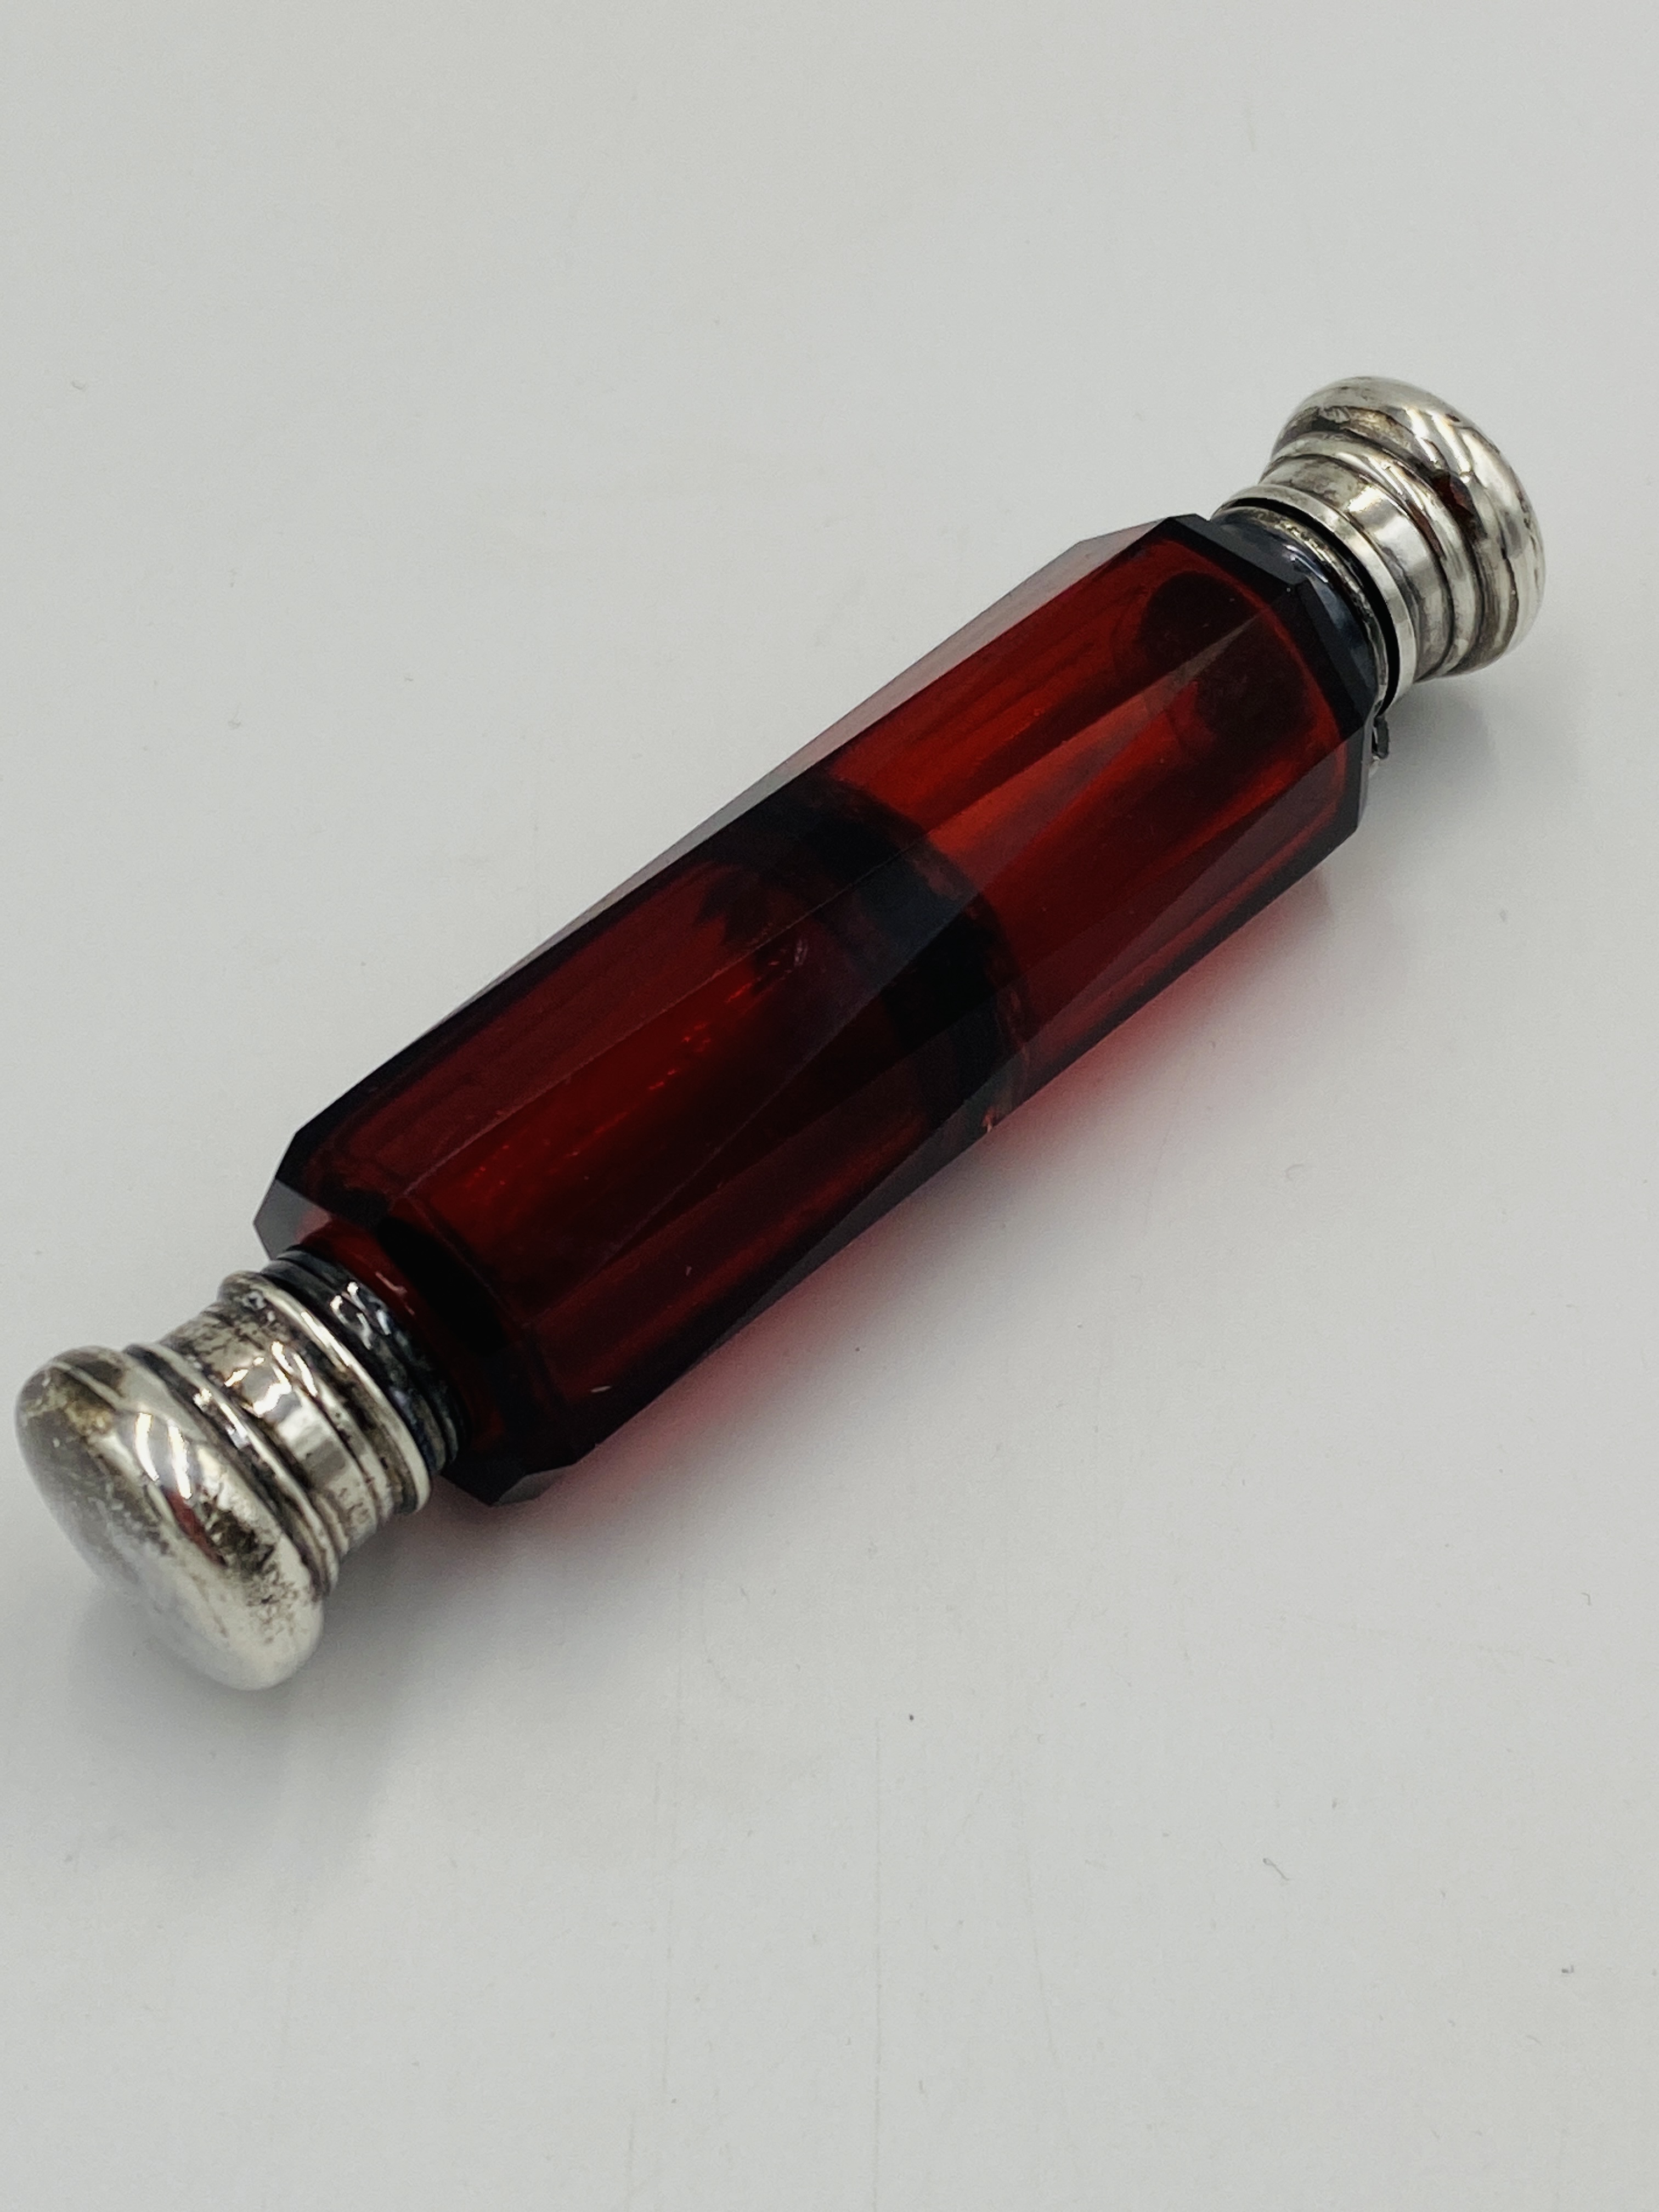 Ruby glass double ended perfume bottle with white metal tops - Image 2 of 5